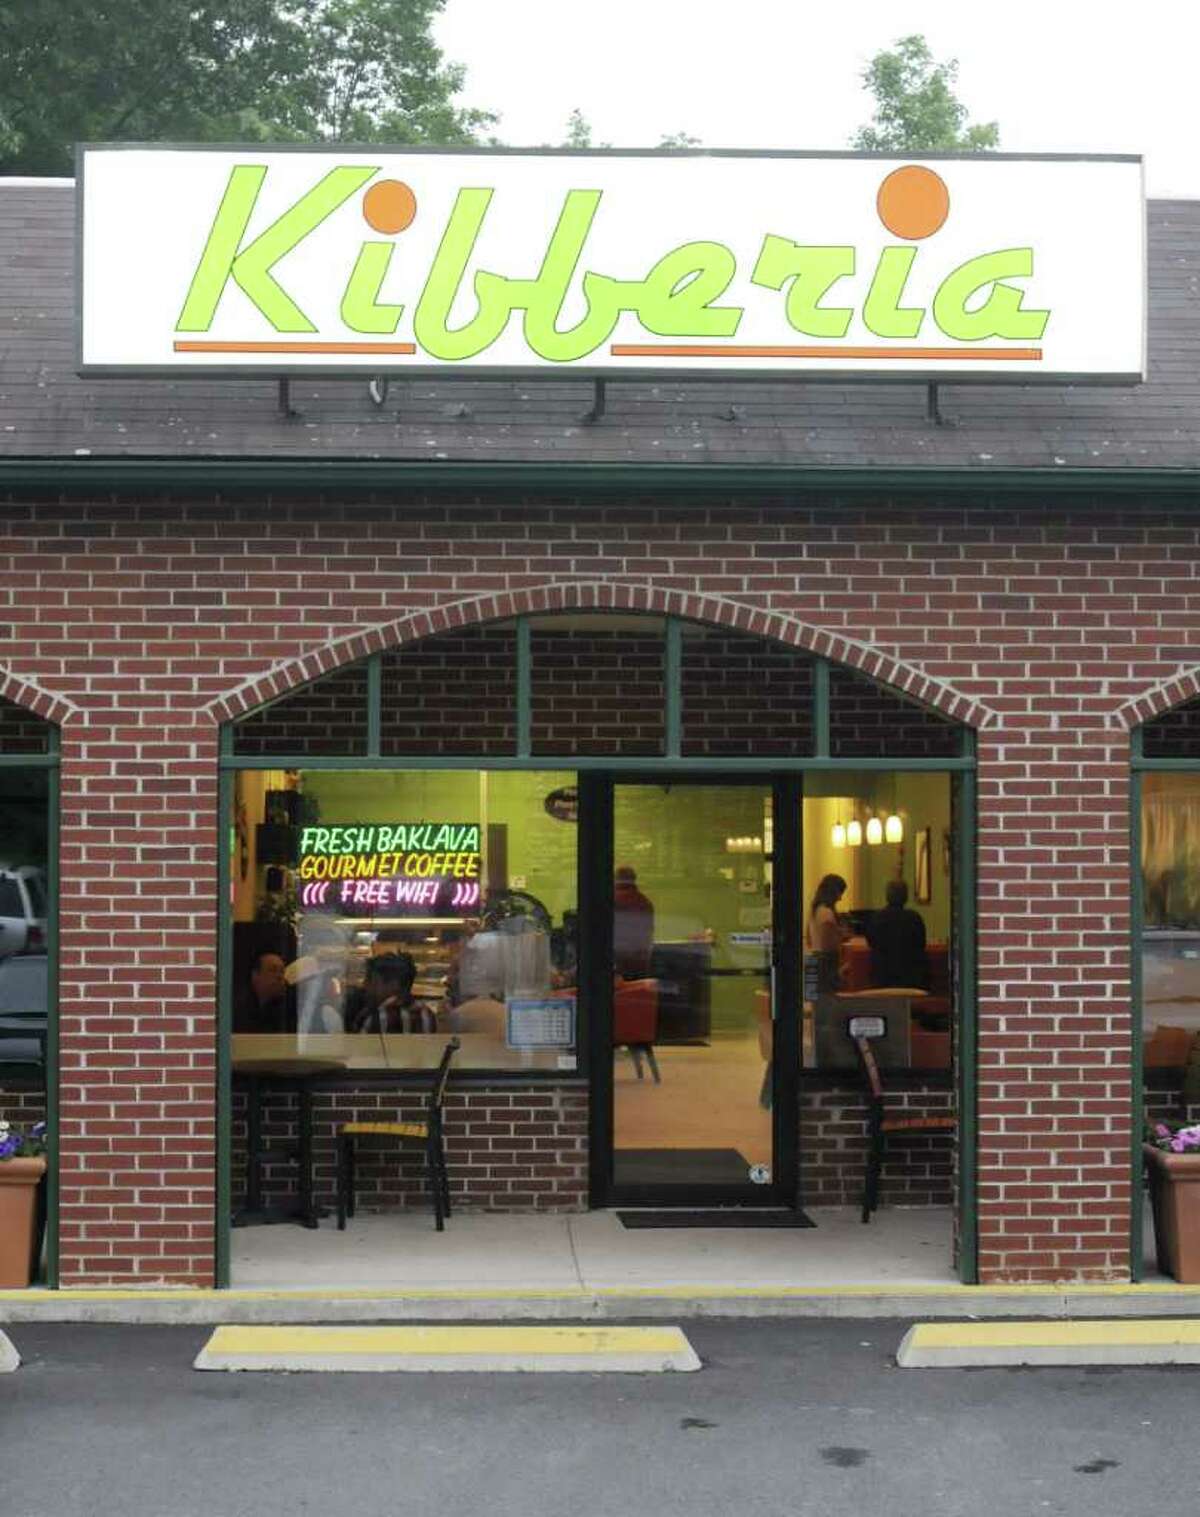 Kibberia, a Middle Eastern restaurant and cafe, in Danbury, is opening a location in Westport.